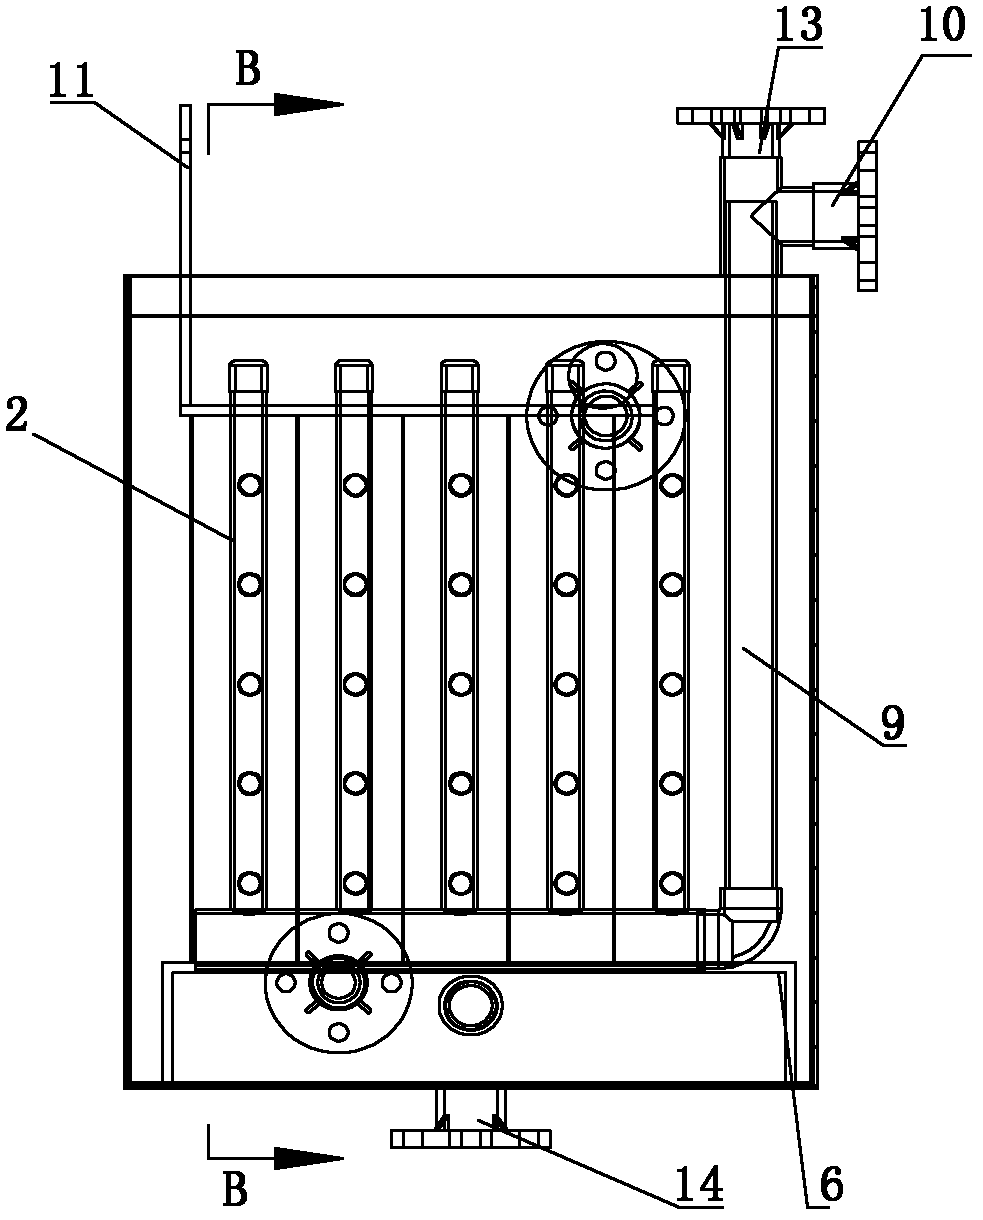 Electrolysis unit with membrane filtration function